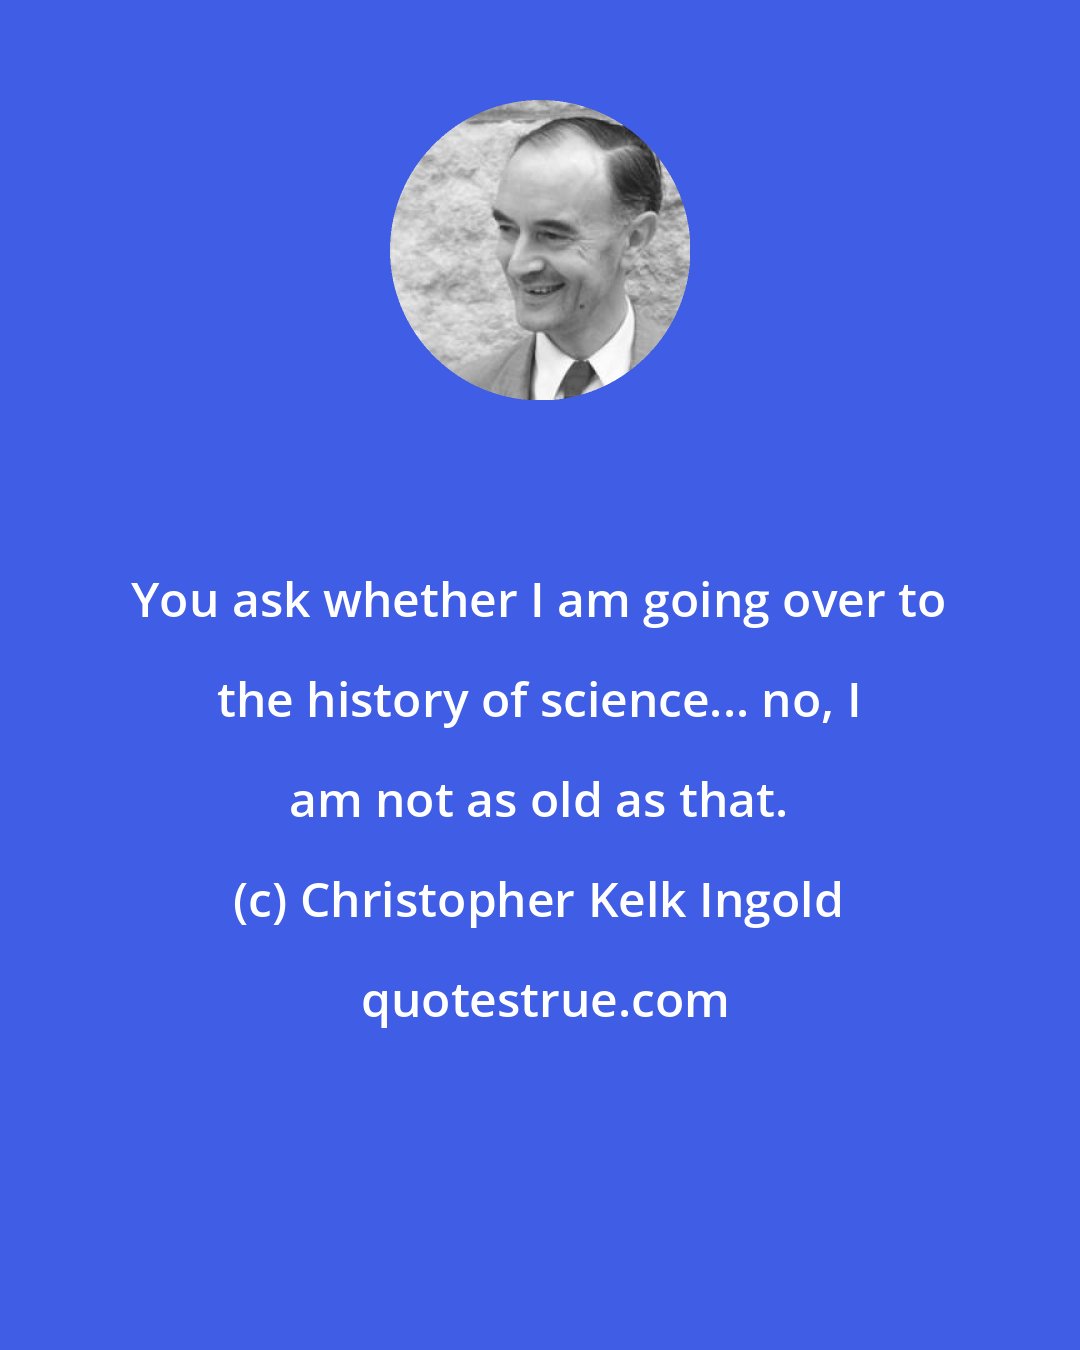 Christopher Kelk Ingold: You ask whether I am going over to the history of science... no, I am not as old as that.